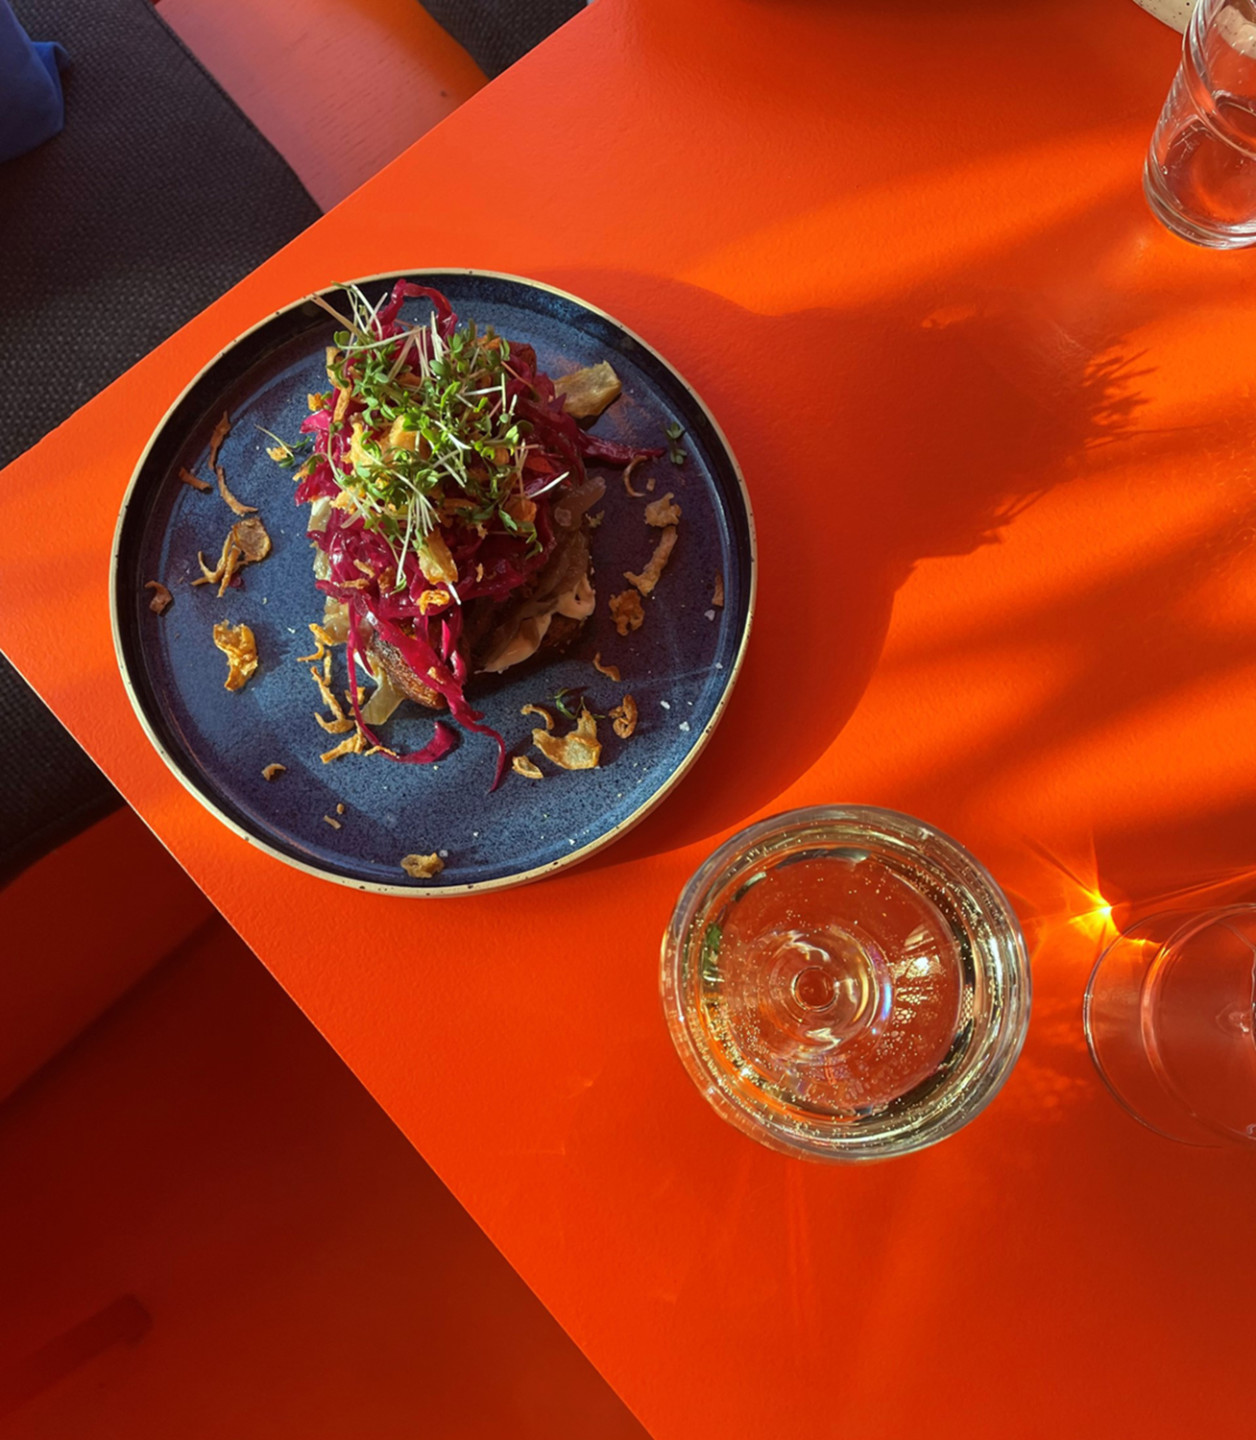 plate with food and glass on orange table